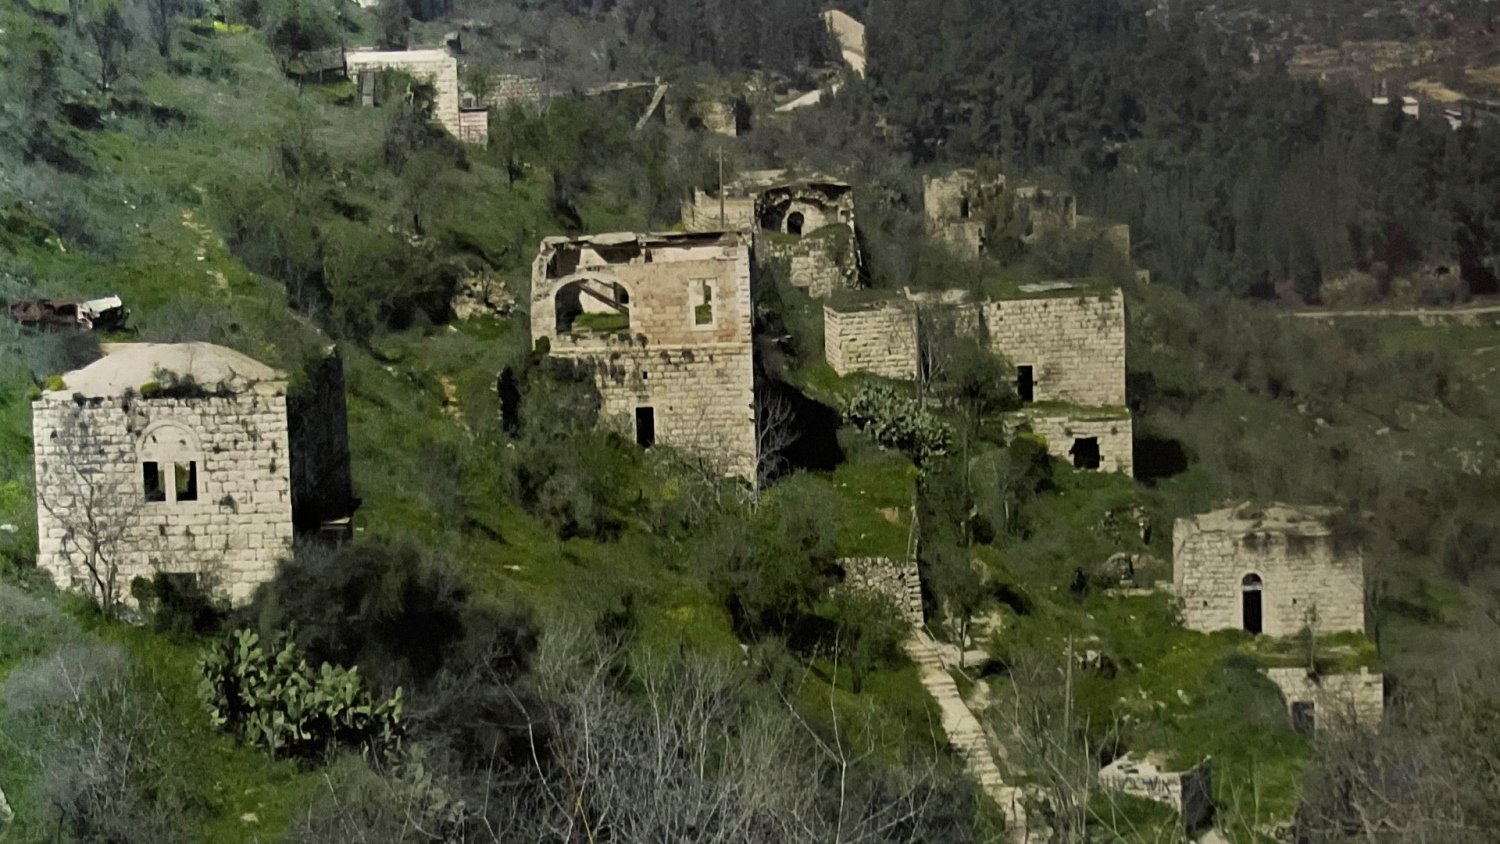 The depopulated Palestinian village of Lifta, its cultural heritage gradually succumbing to nature